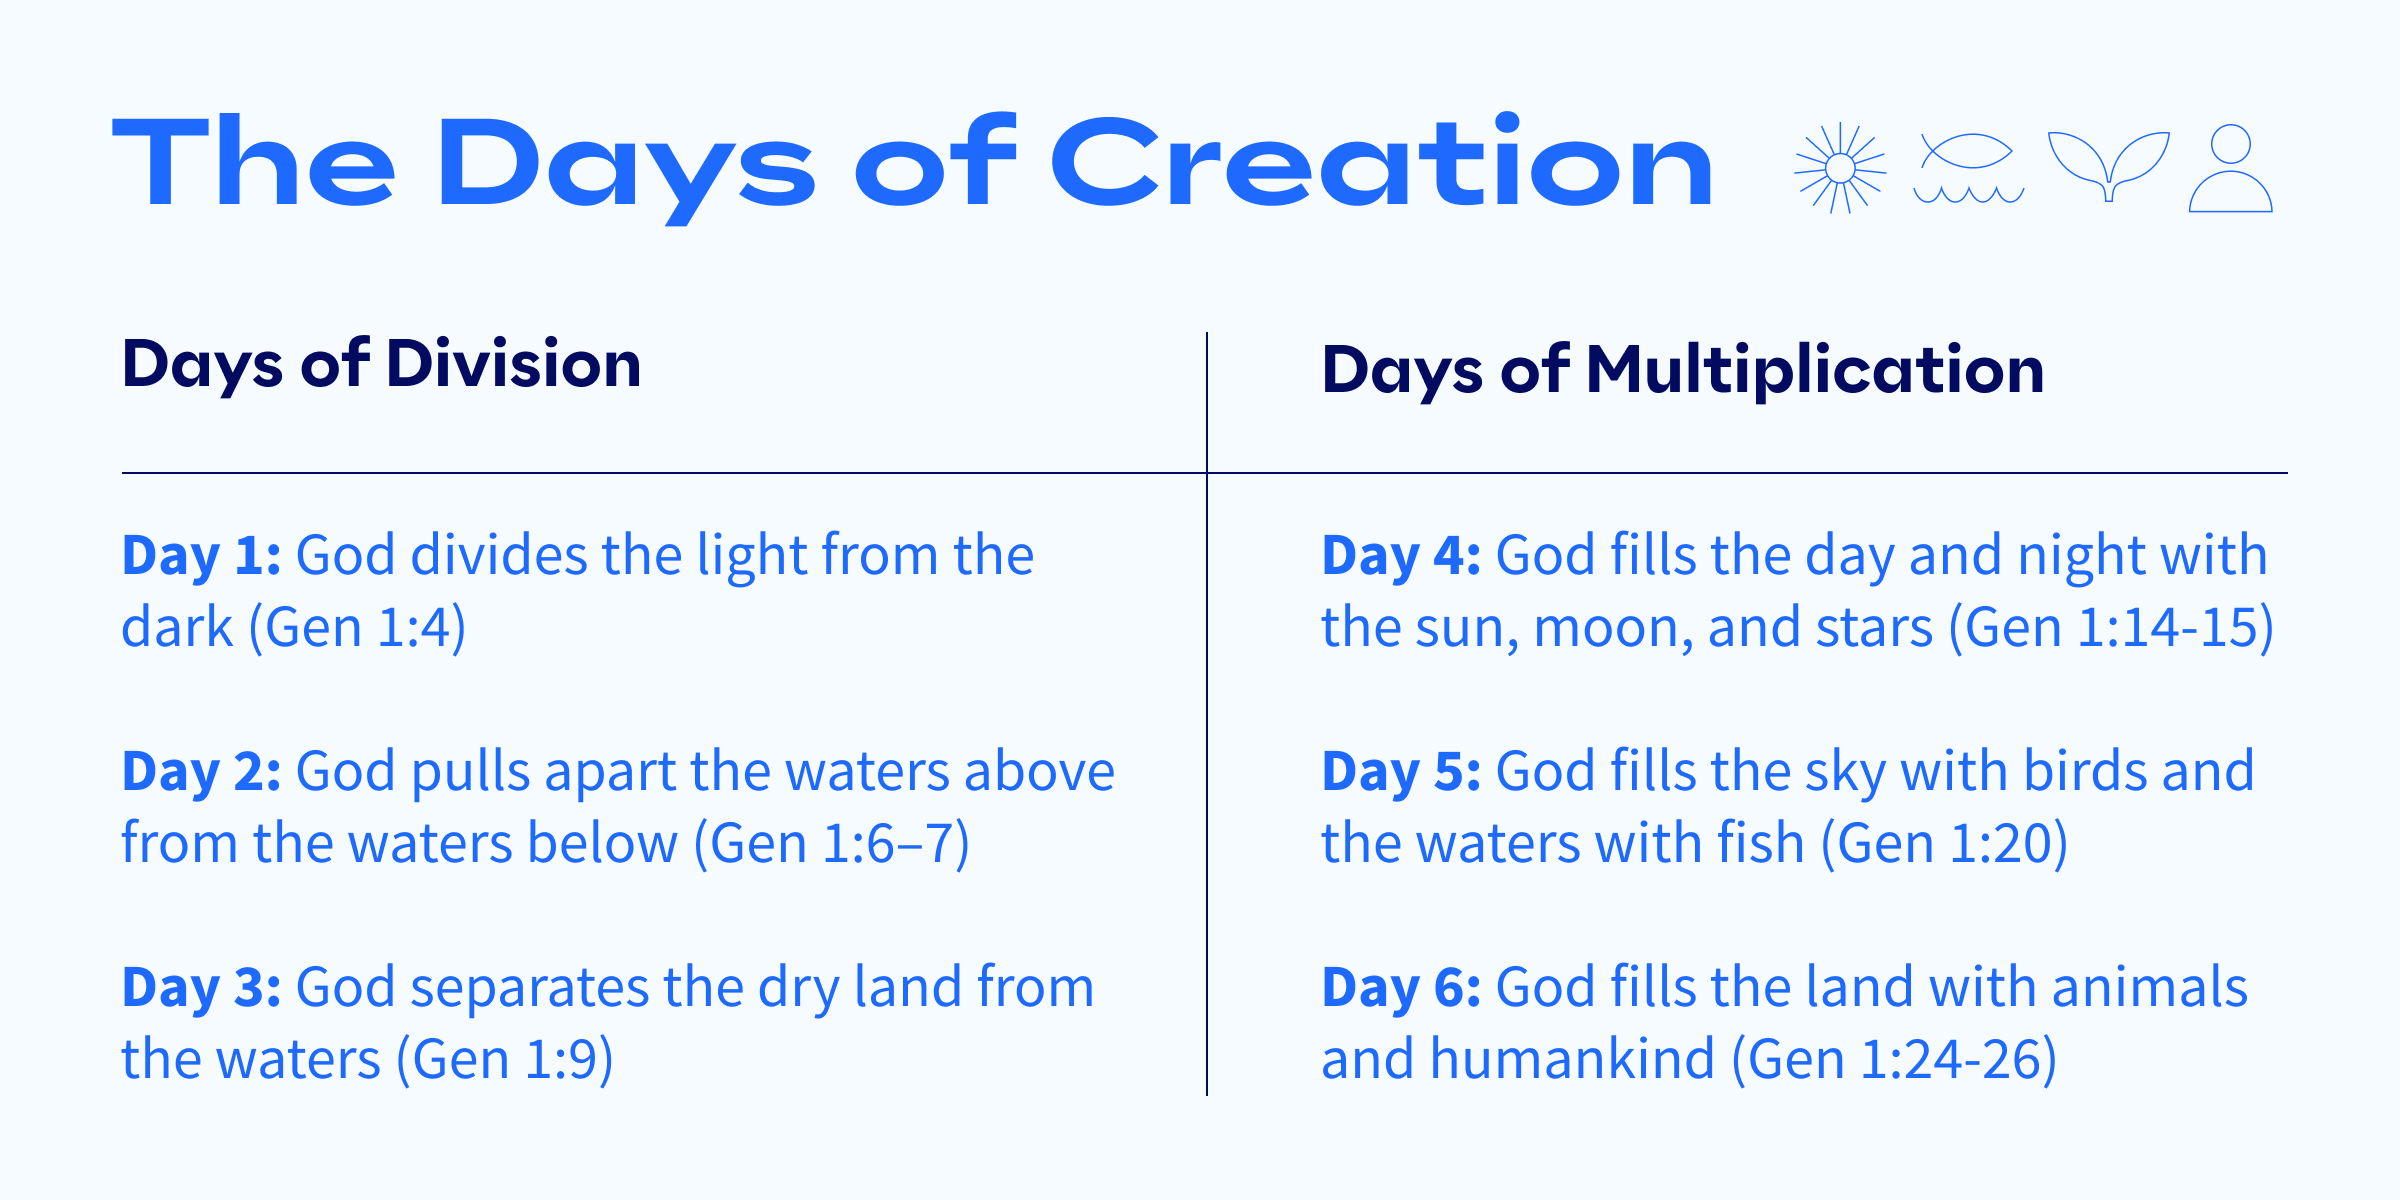 A chart displaying the six days of creation and what occurred each day (three days of division and three days of multiplication).